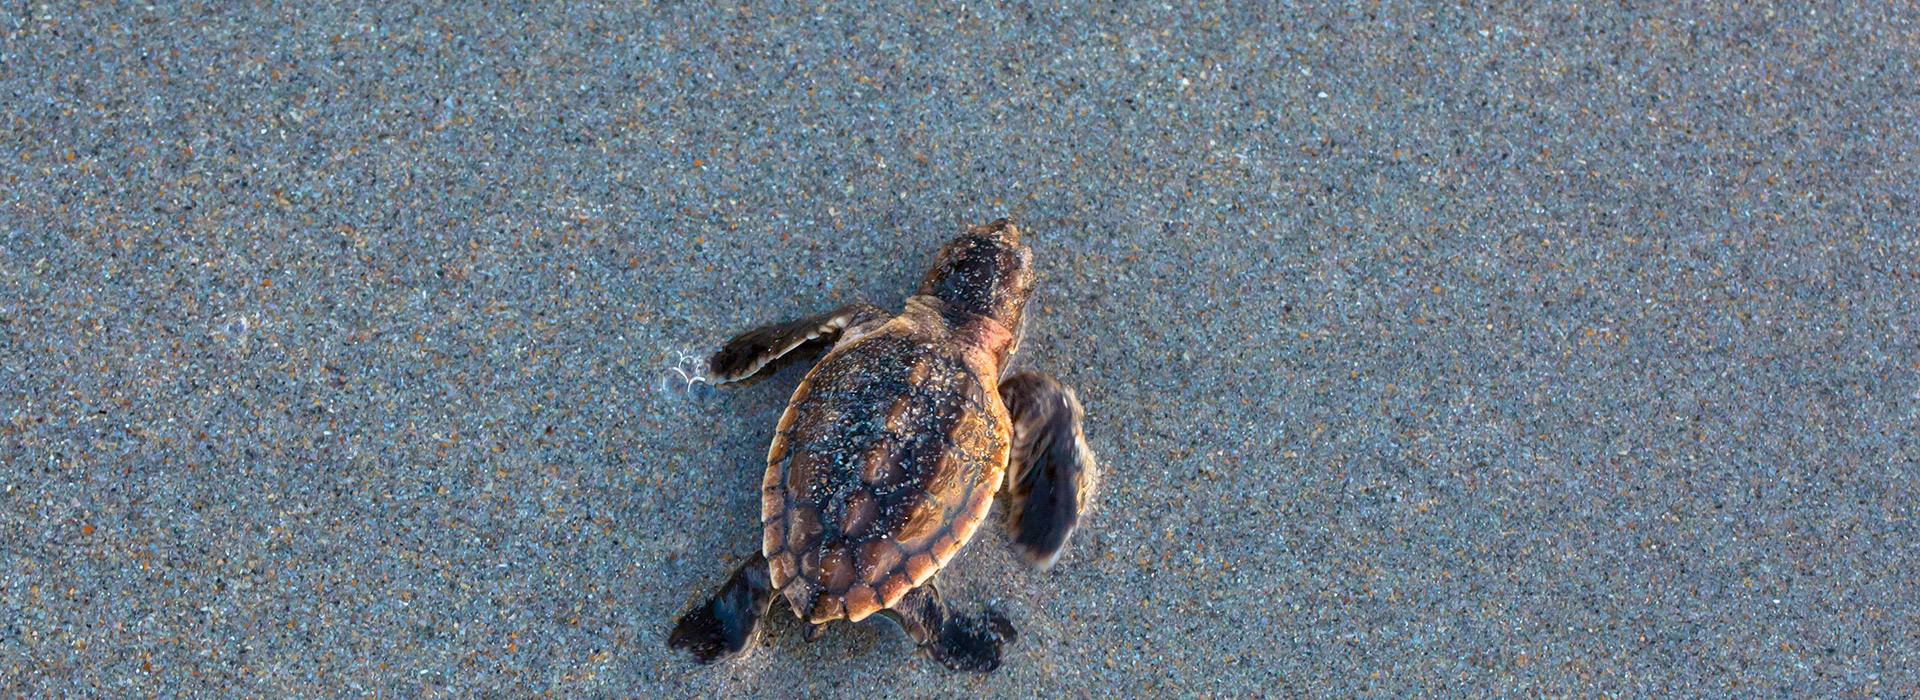 Turtle Hatchling on the sand